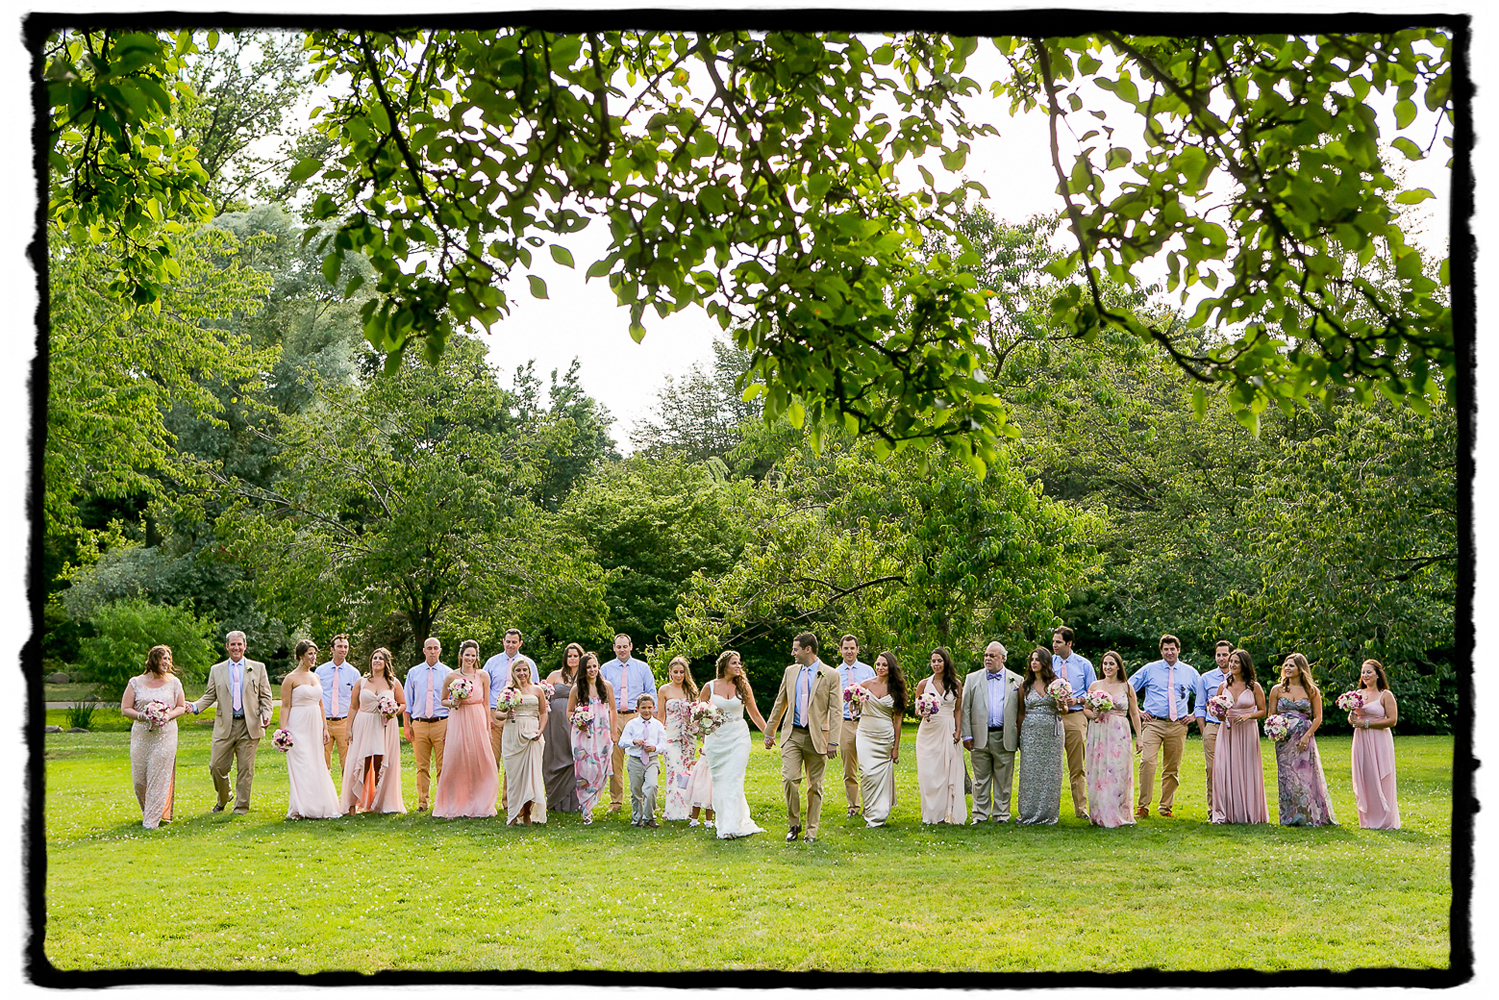 Rorie & Adam's wedding party in summer hues  take a stroll at The Brooklyn Botanic Garden.